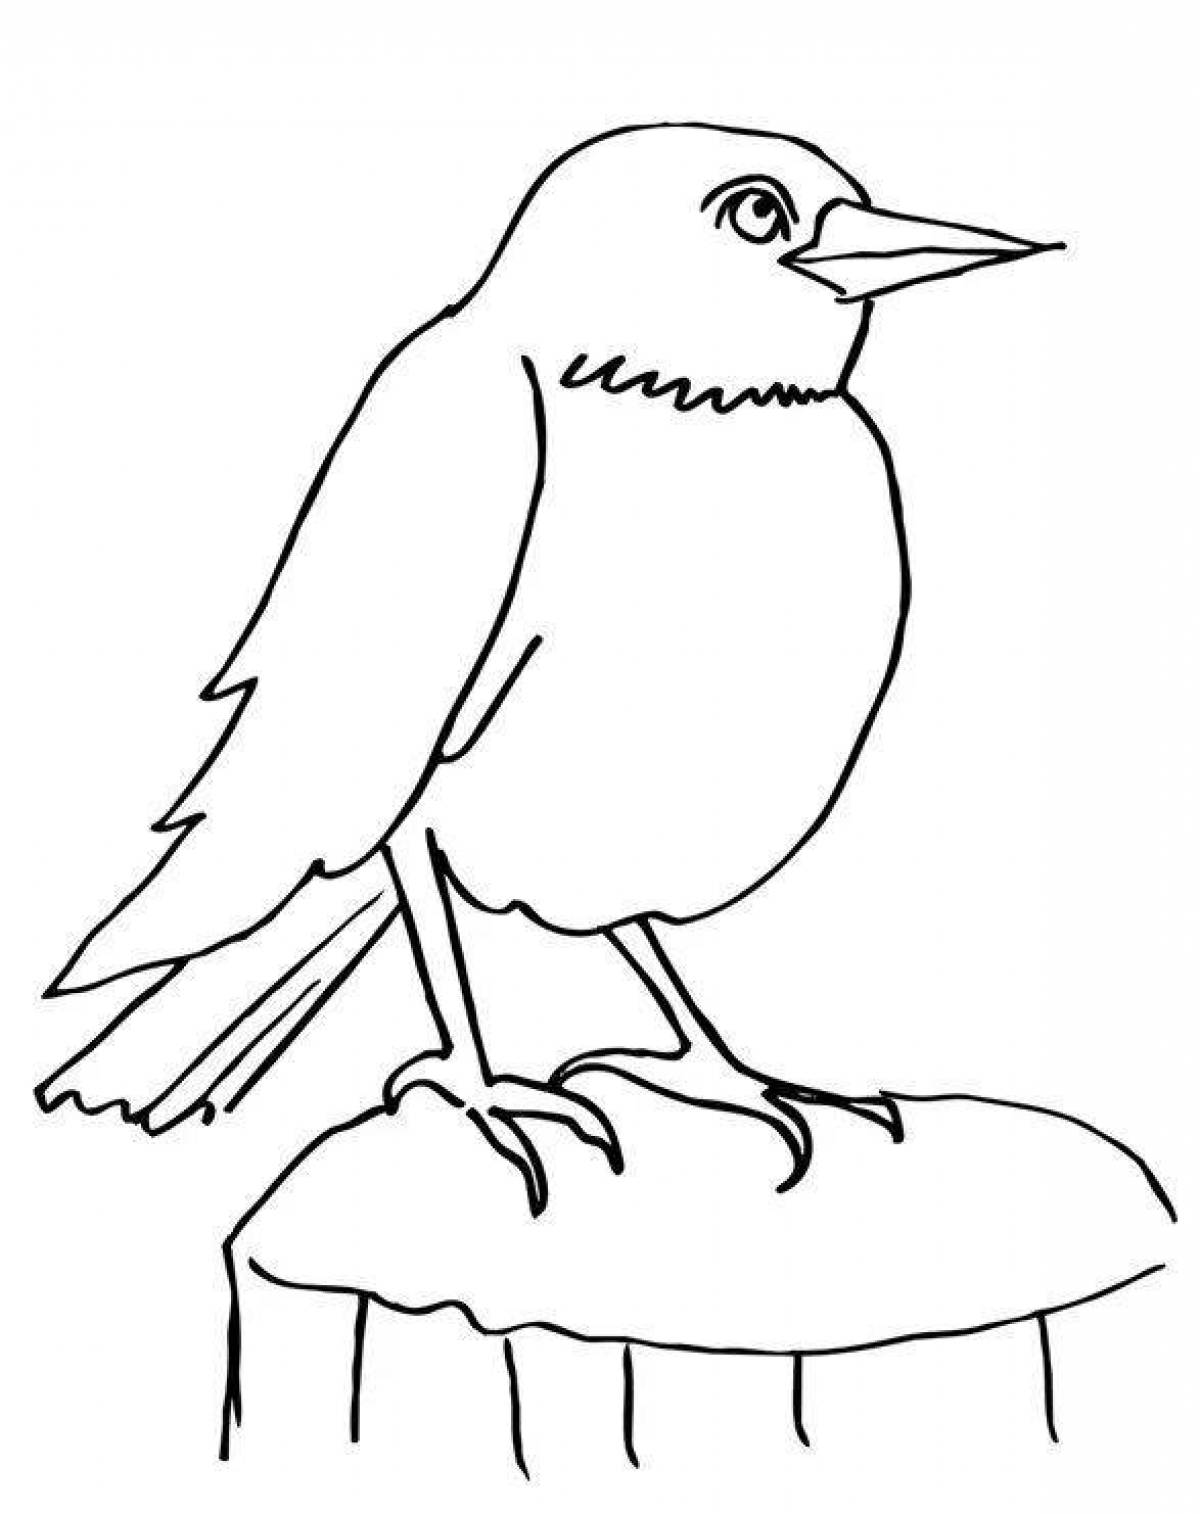 Colorful jackdaw coloring page